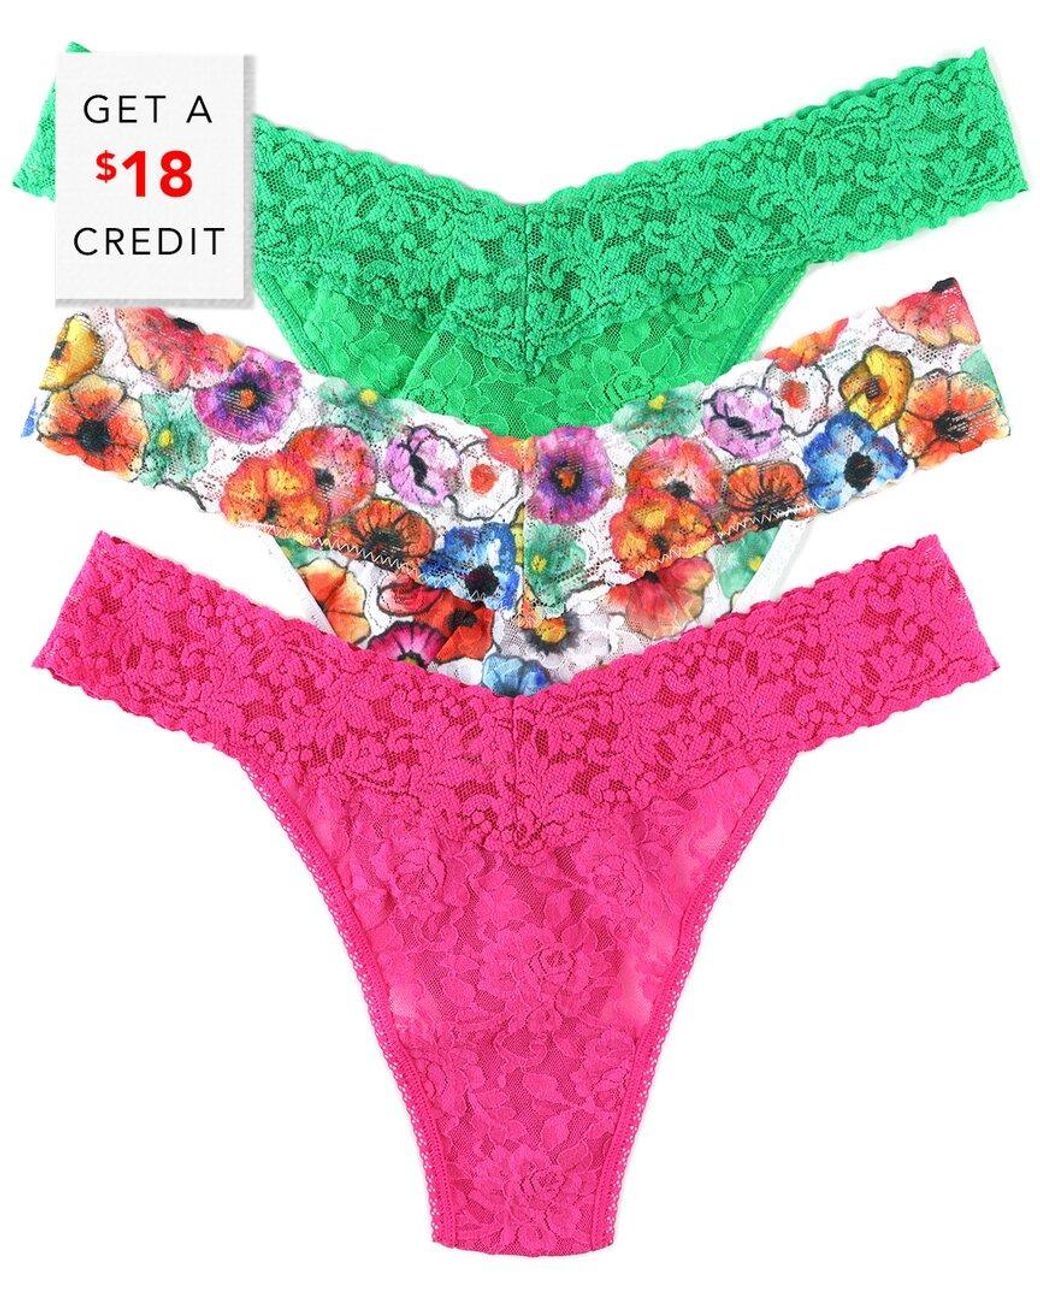 Hanky Panky 2 So 1 Print Original In Pol With $18 Credit in Pink | Lyst